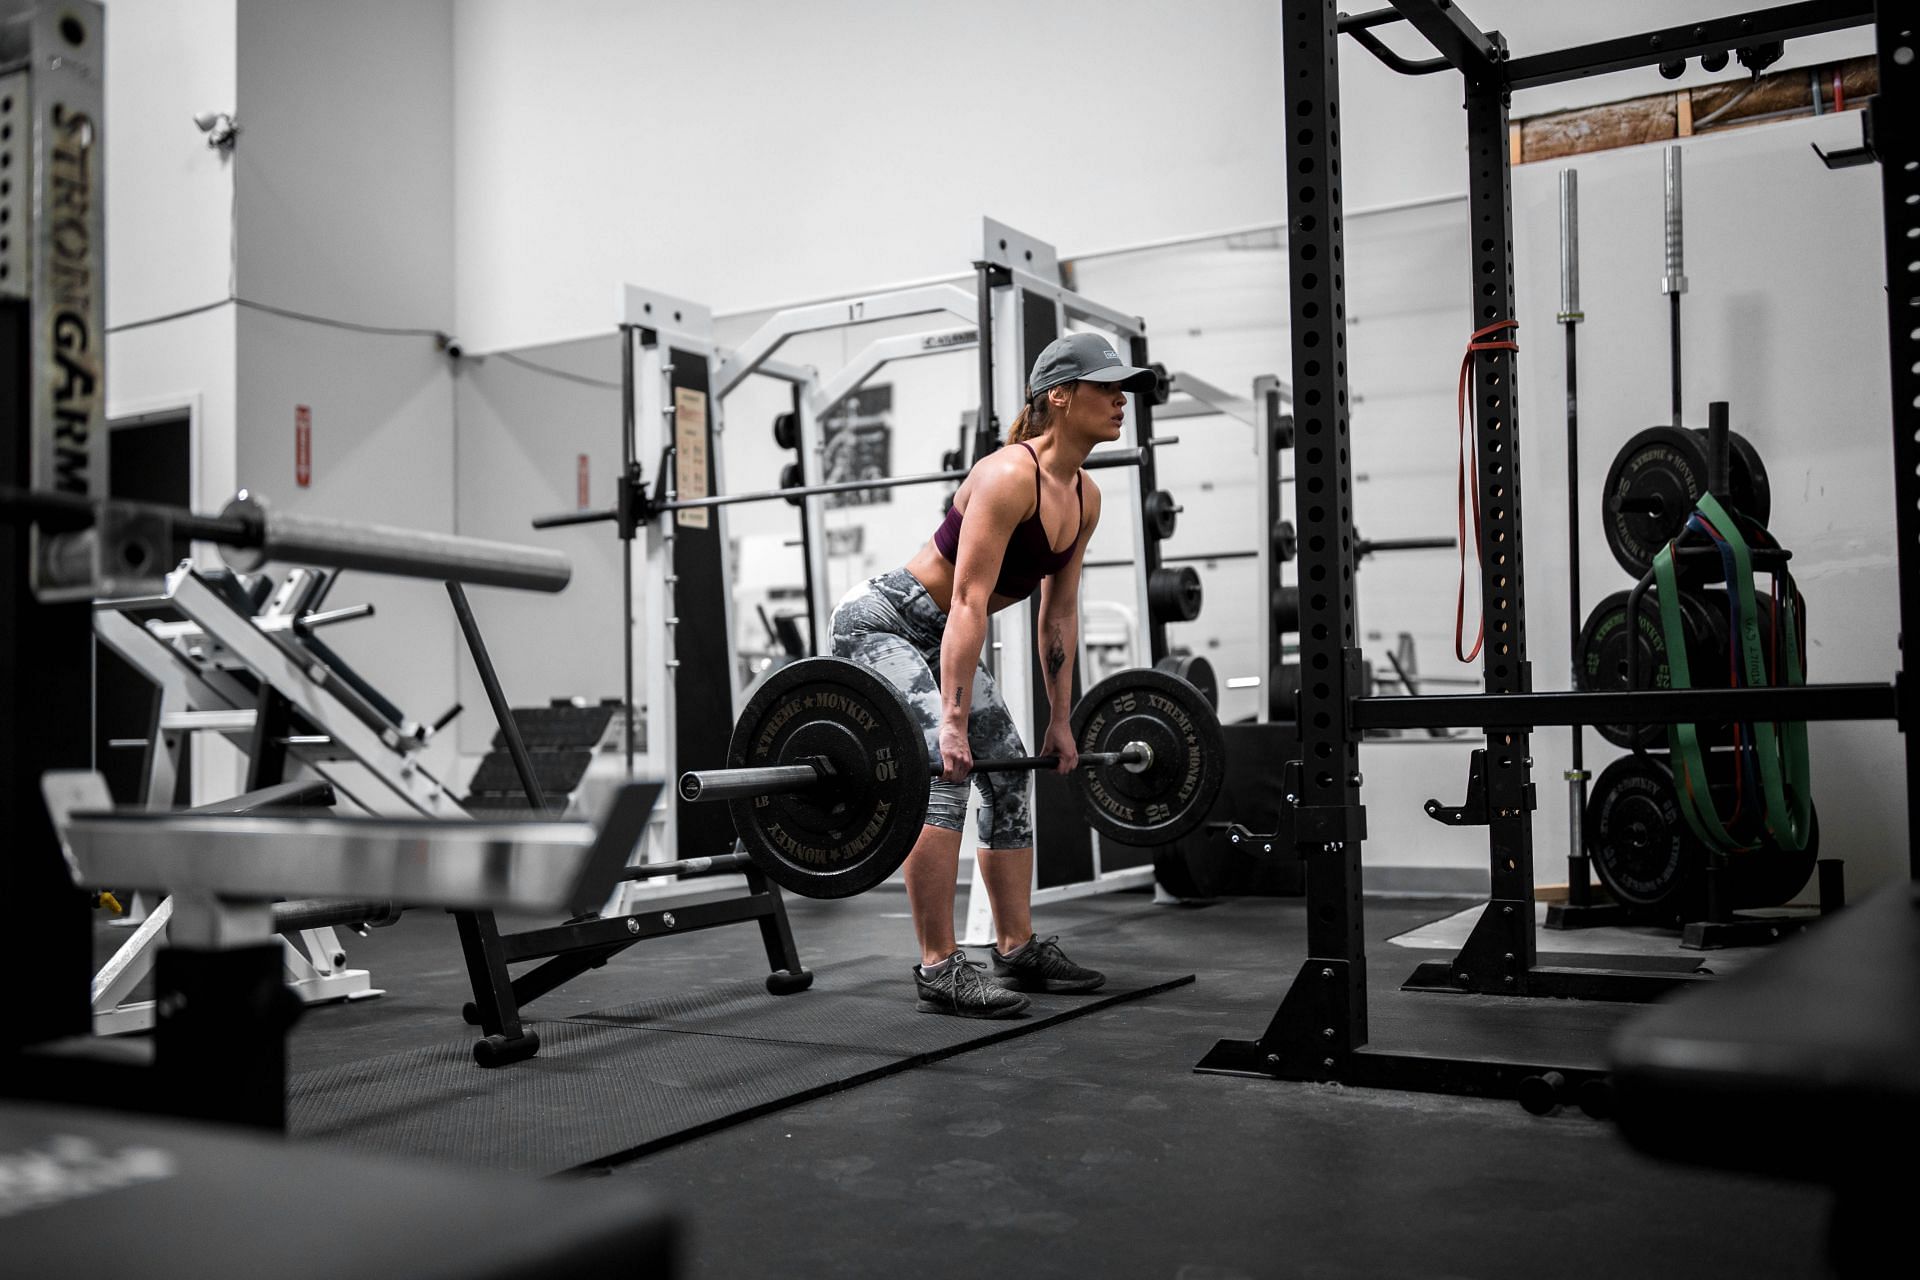 Giant sets is a powerful way to build muscle without having to take on large amounts of weight. (Image via Unsplash /Anastase Maragos)